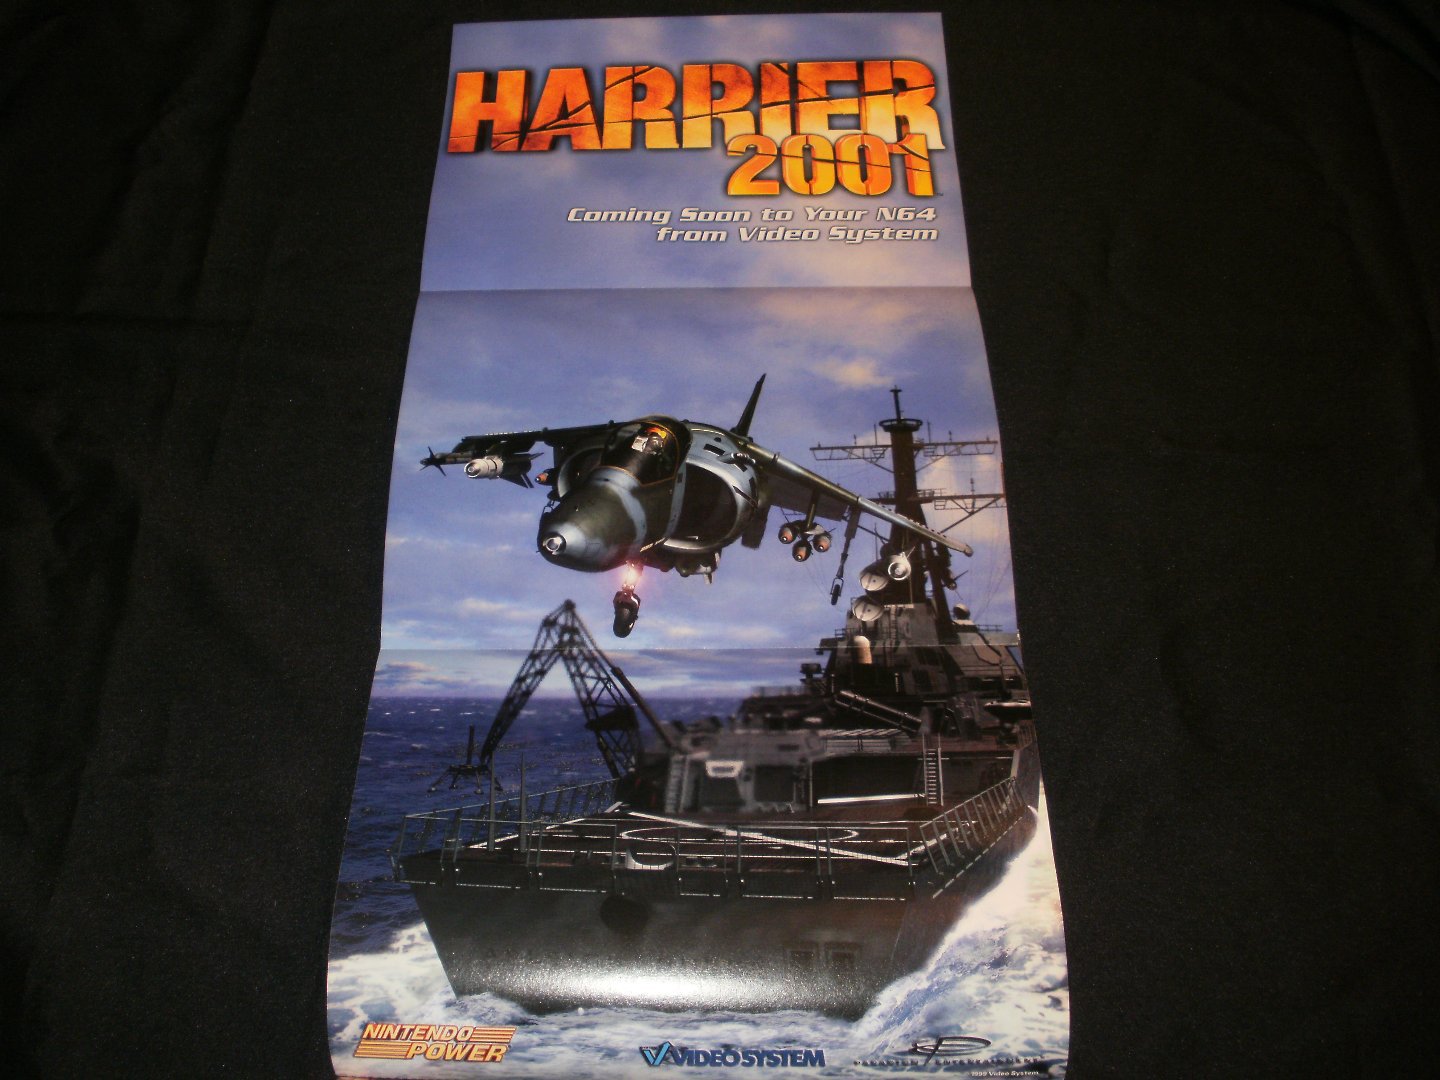 Harrier 2001 Poster - Nintendo Power May, 1999 - Never Used